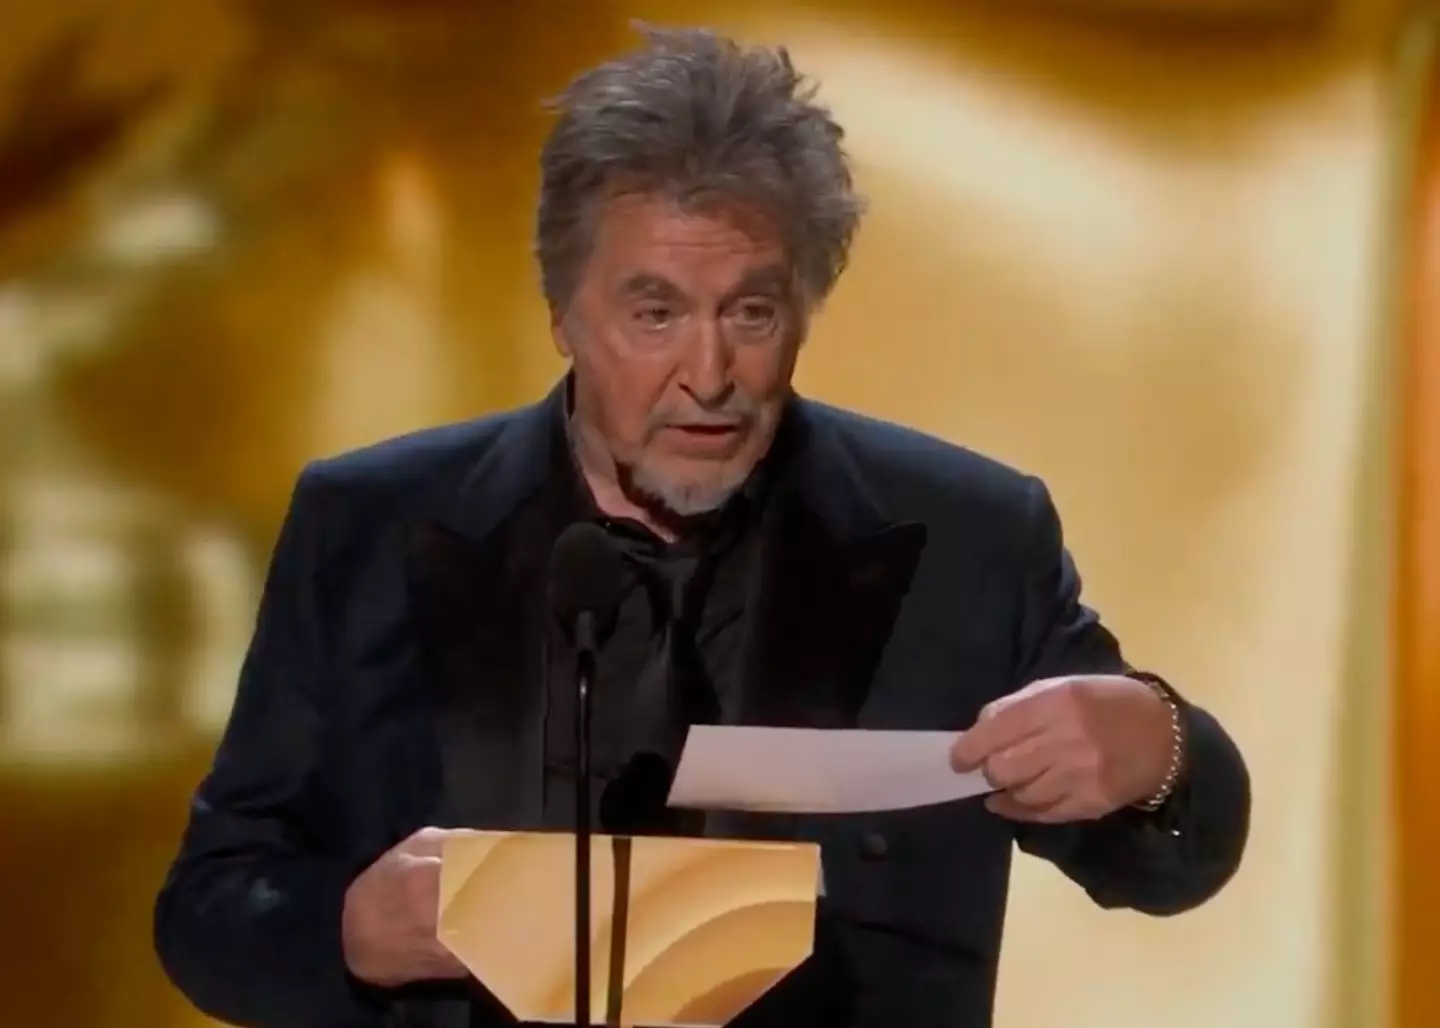 Social media users were quick to comment about the bizarre behavior of Al Pacino.